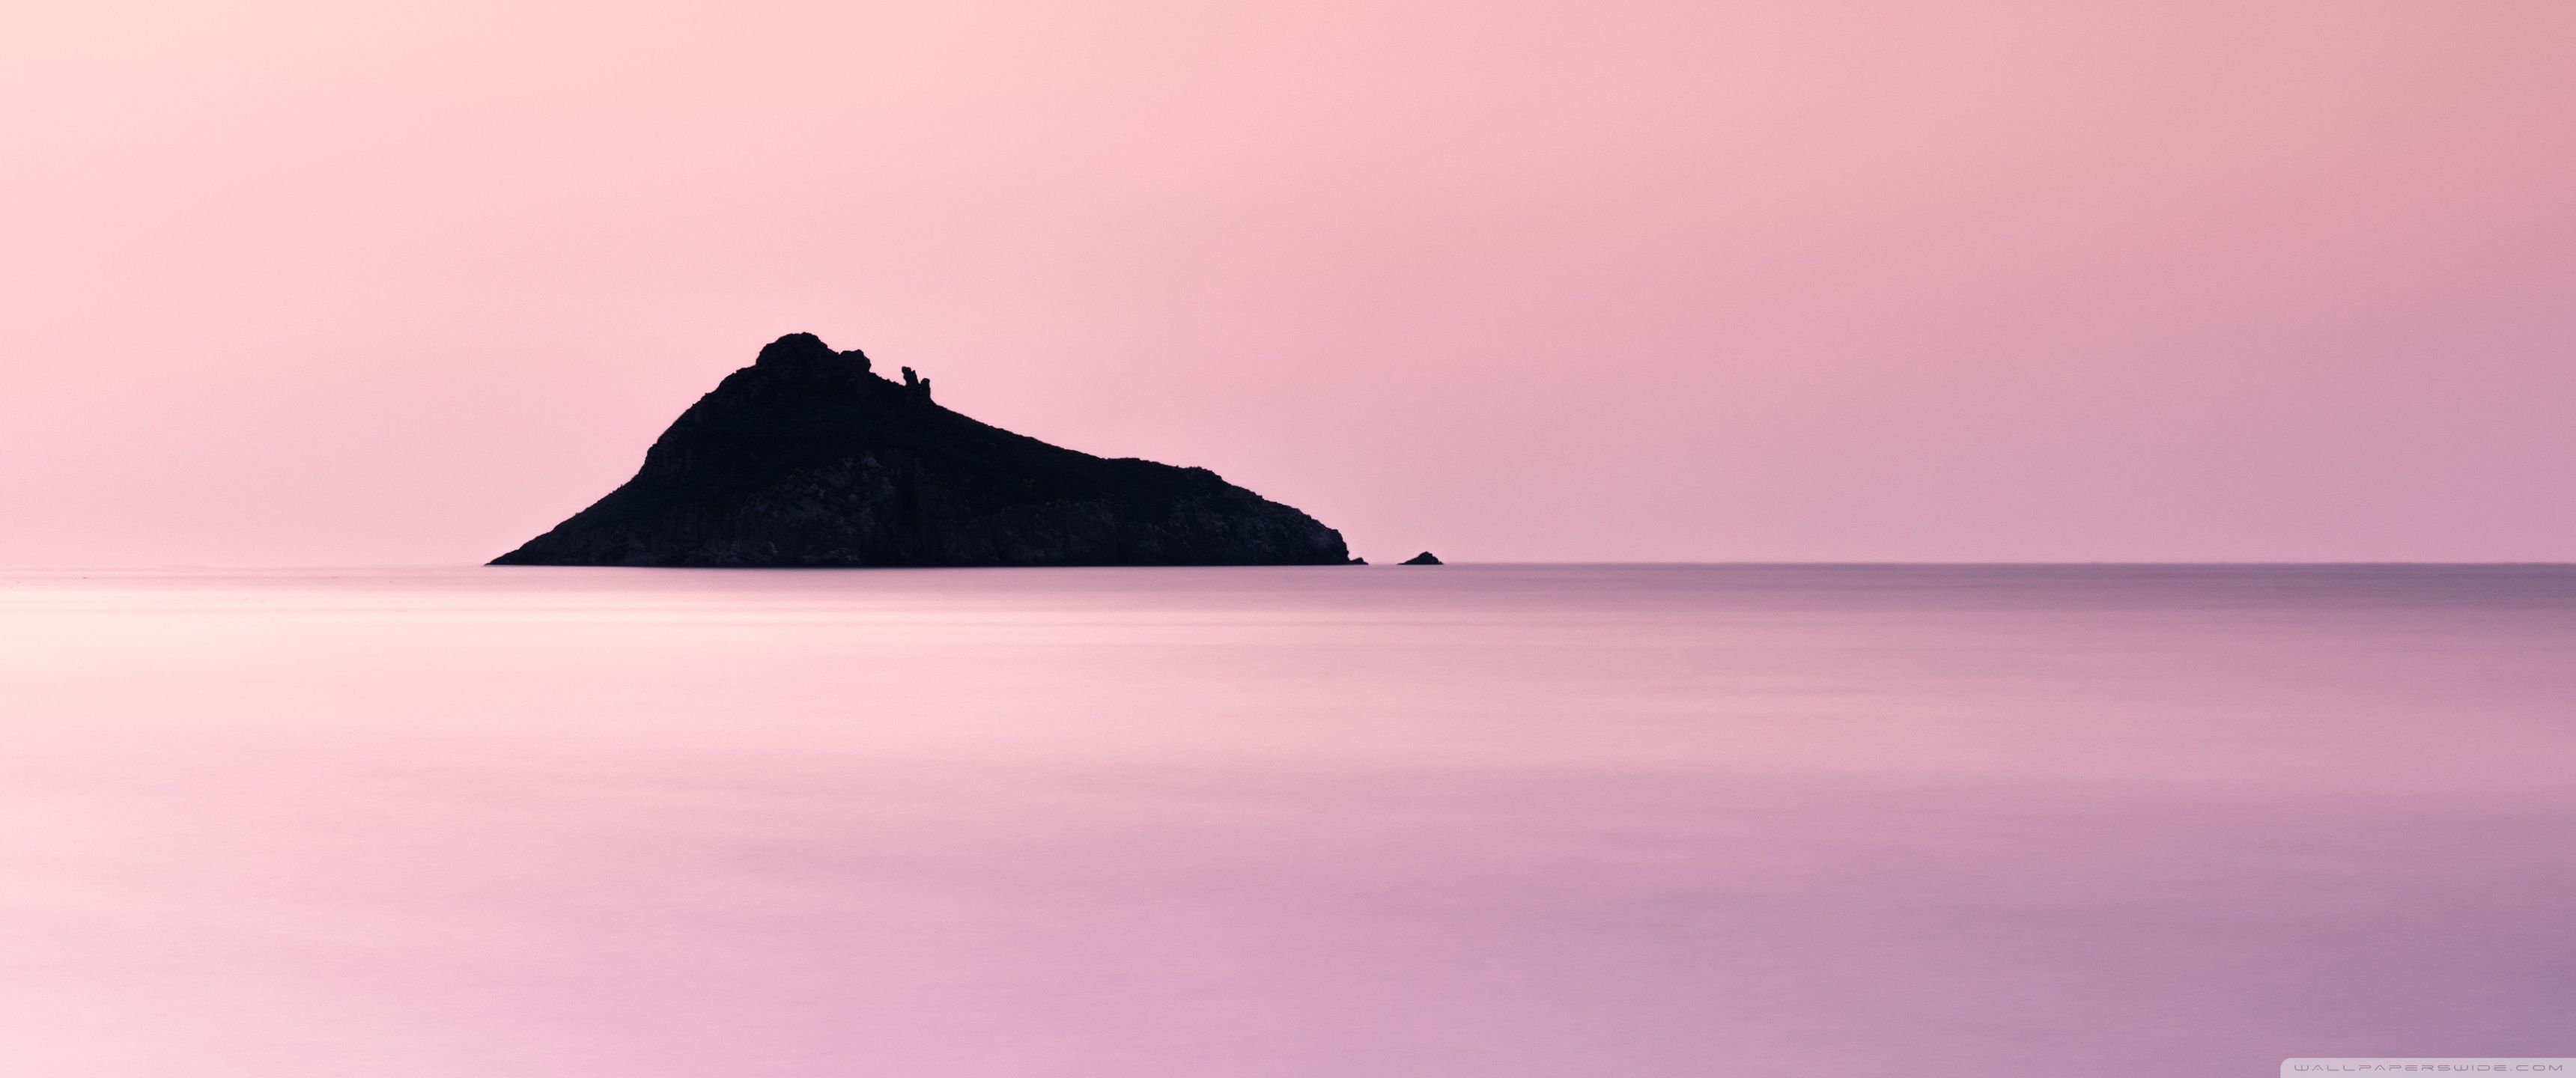 Island in the middle of the sea during sunset - 3440x1440